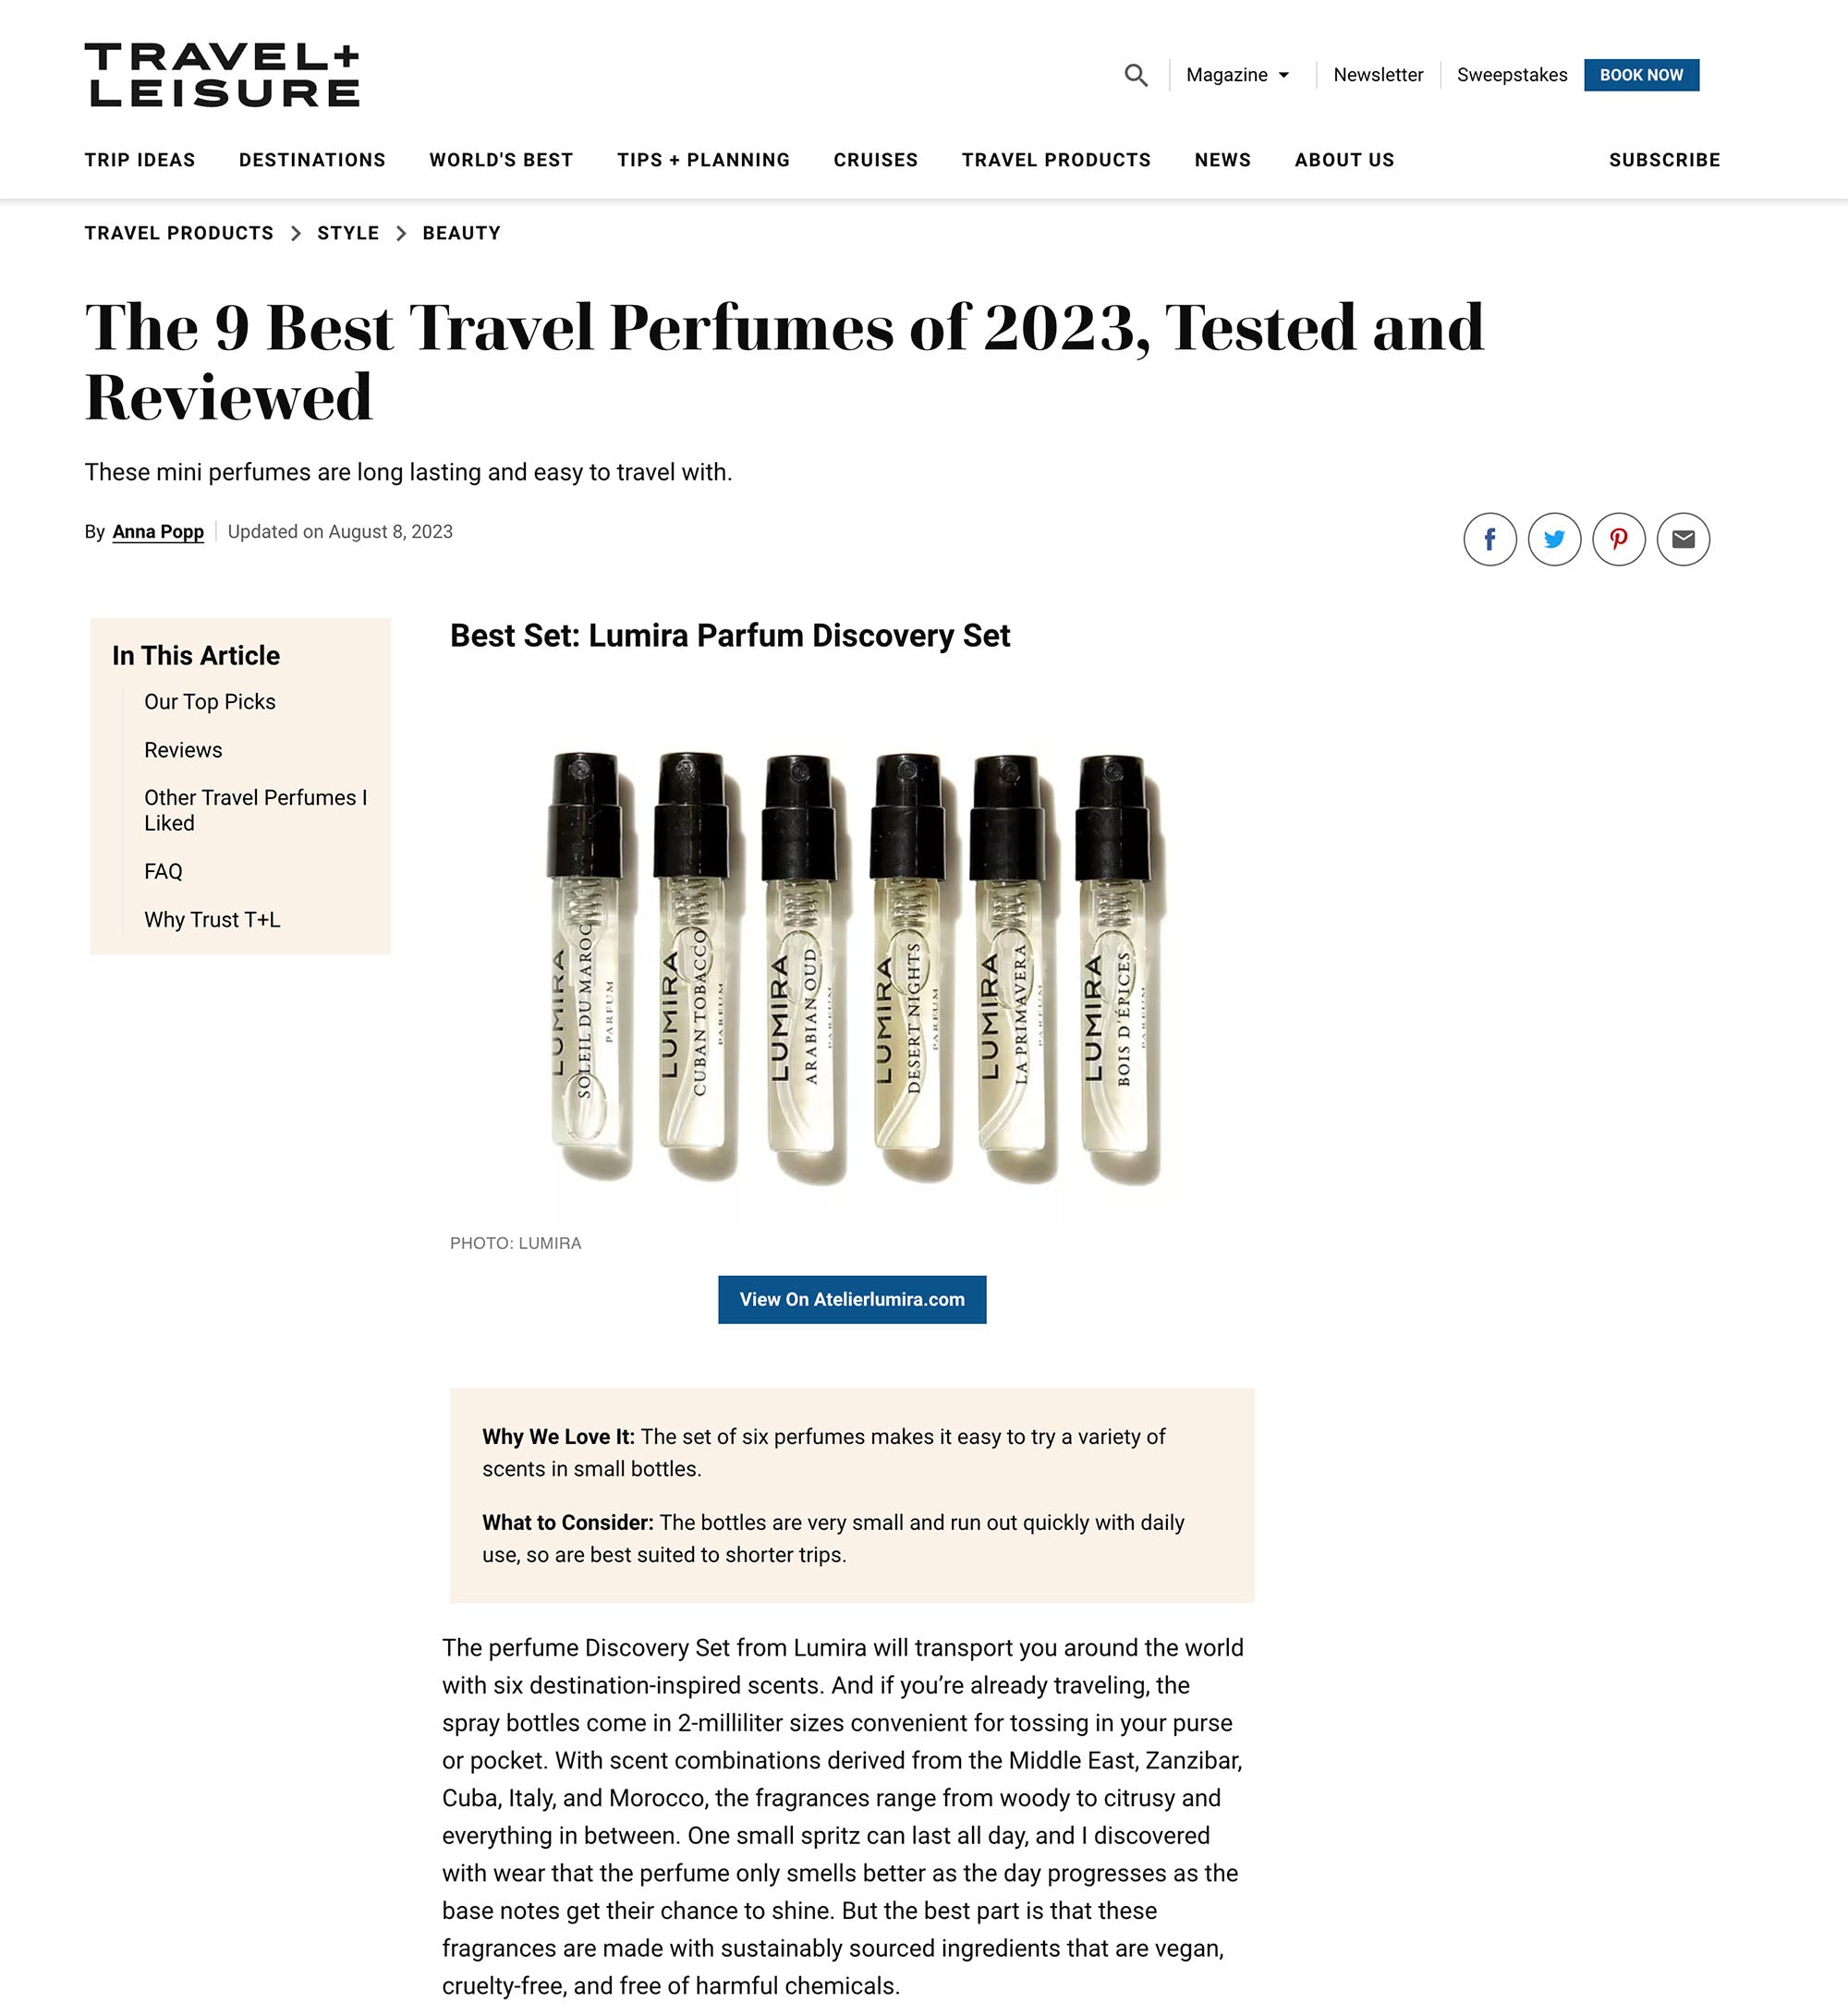 Travel+Leisure has named the Lumira Parfum Discovery Set as Best Set